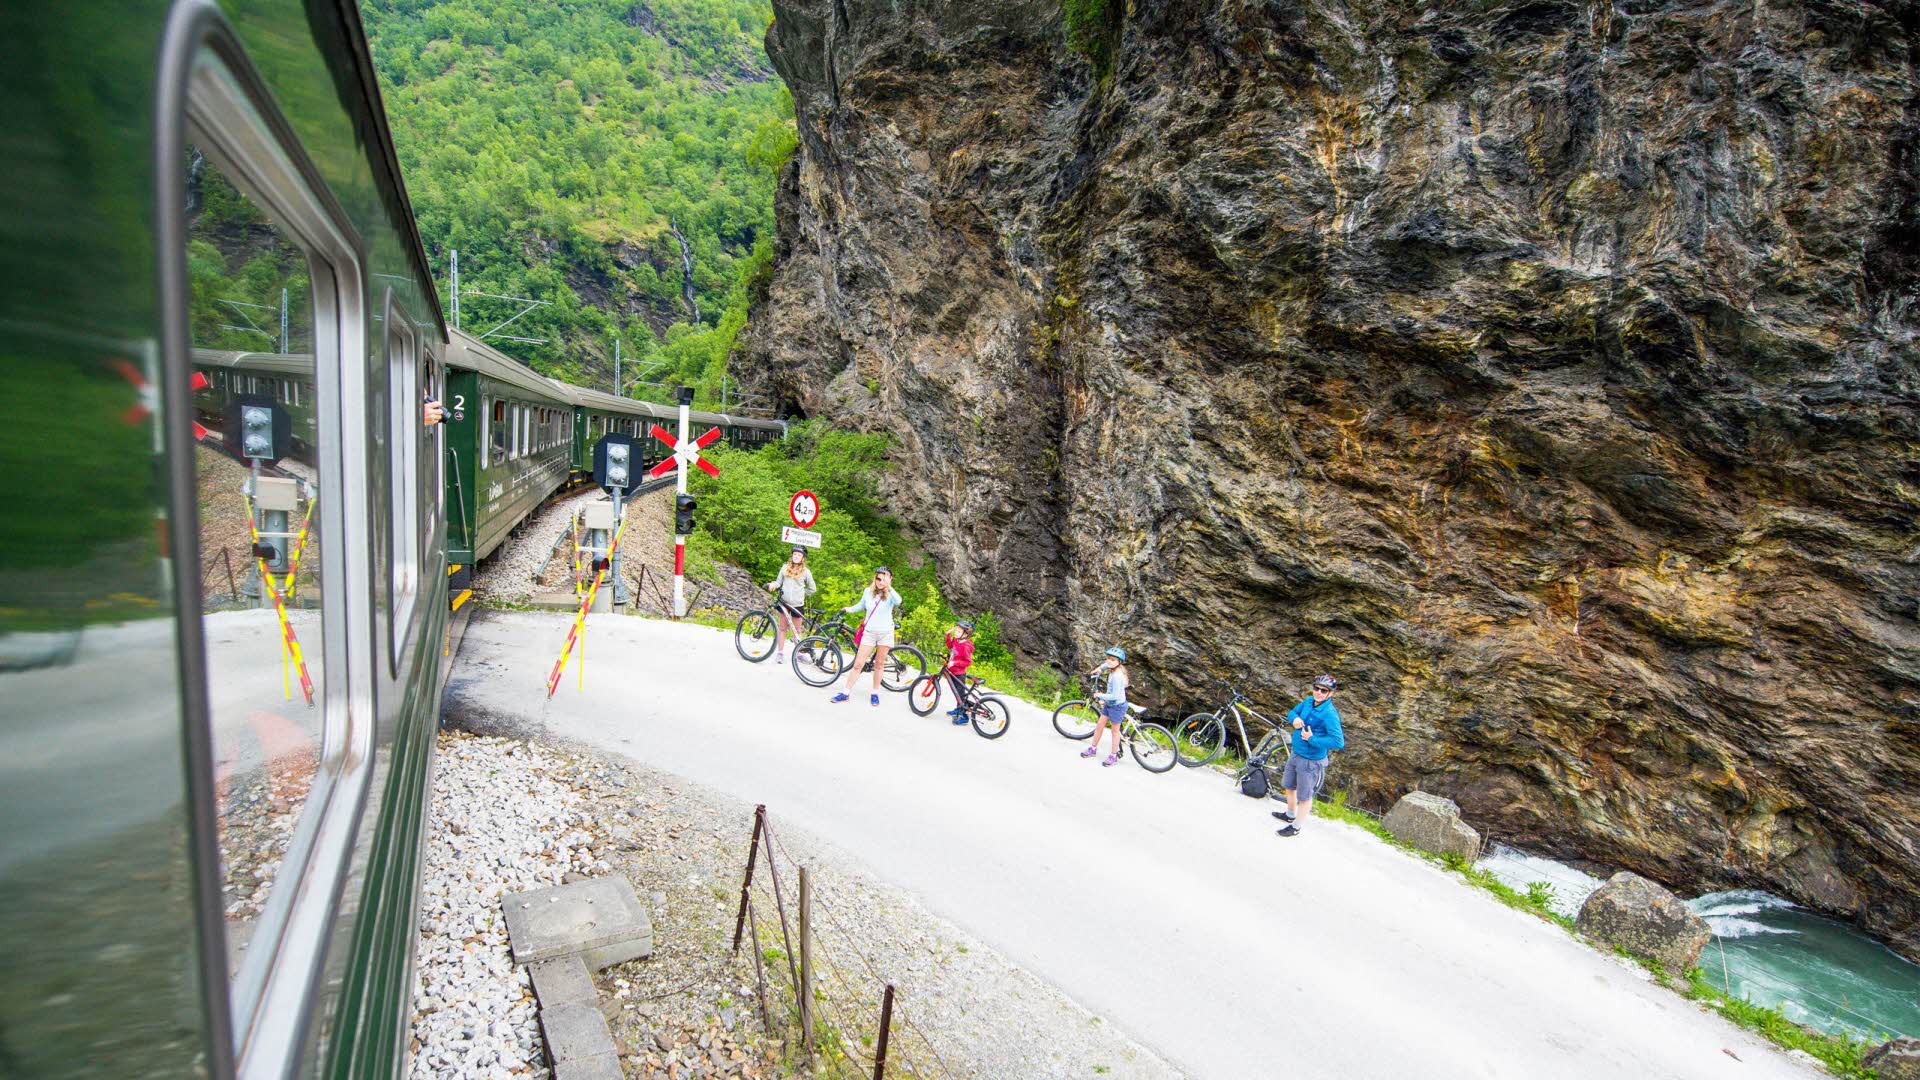 Family of 4 on bicycles waiting when Flam Railway is passing the Navvy road in Flåm valley with green river flowing behind